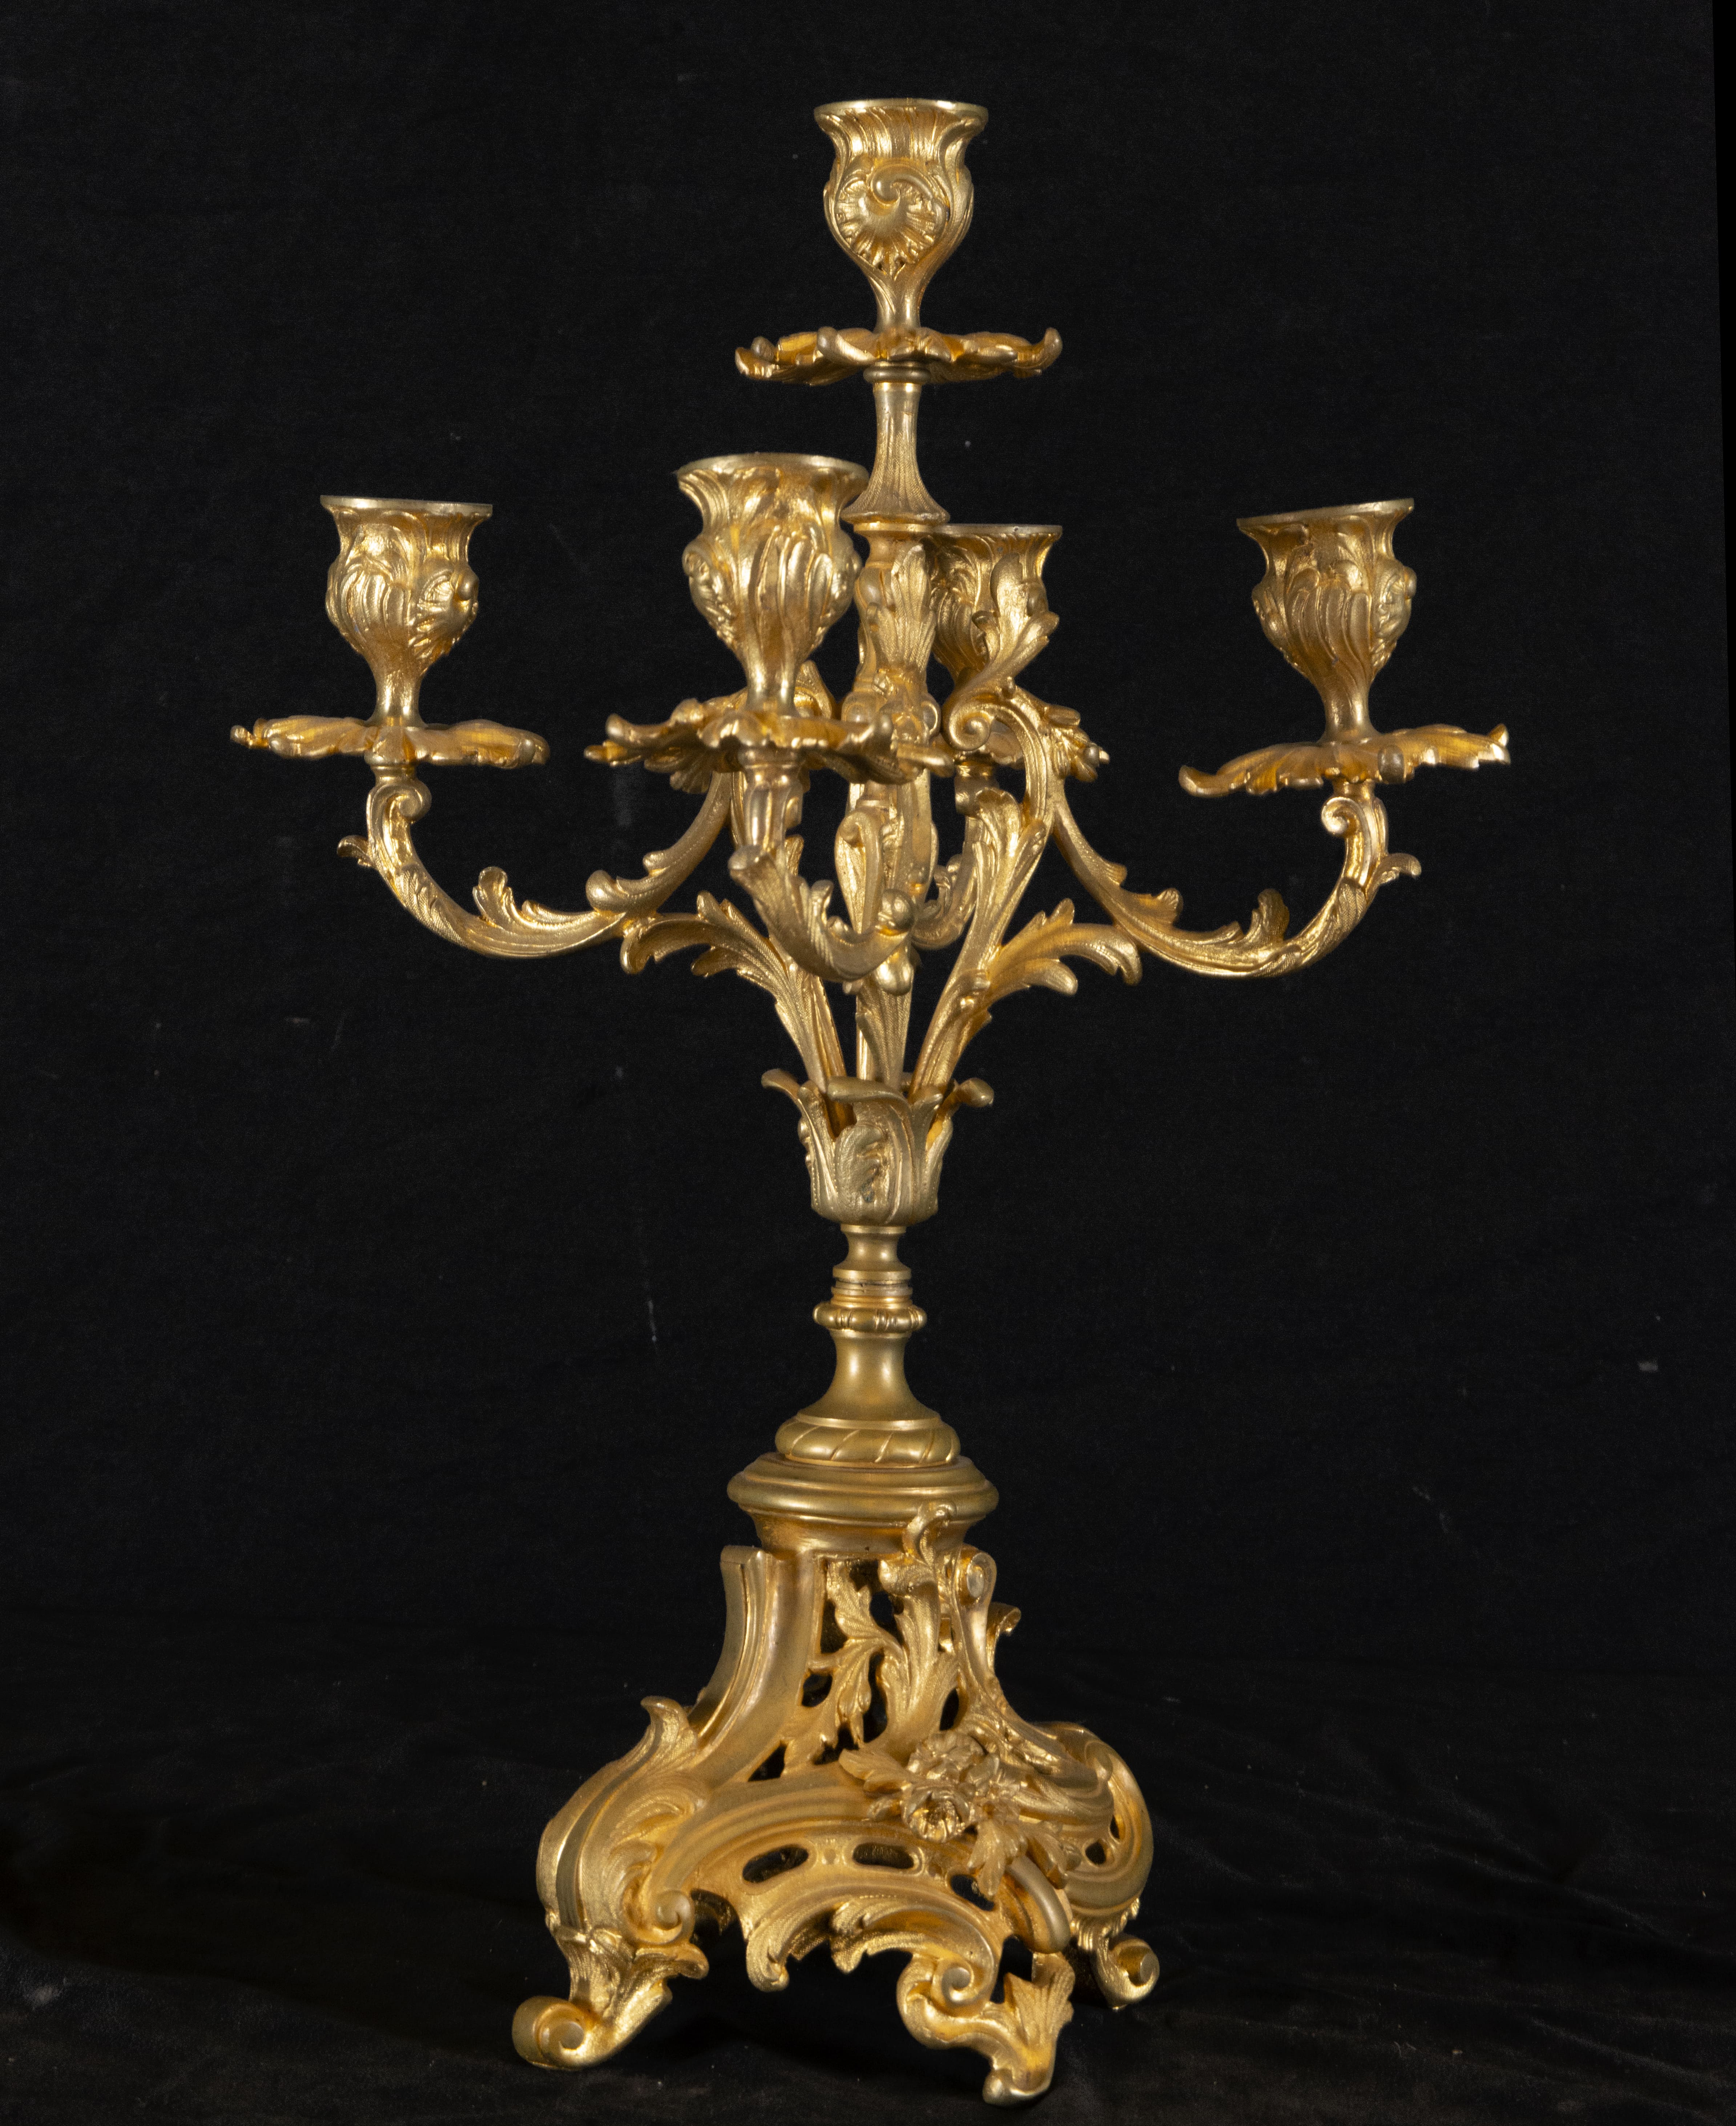 Complete French garrison in mercury gilt bronze in Louis XV style, 19th century French work - Image 3 of 7